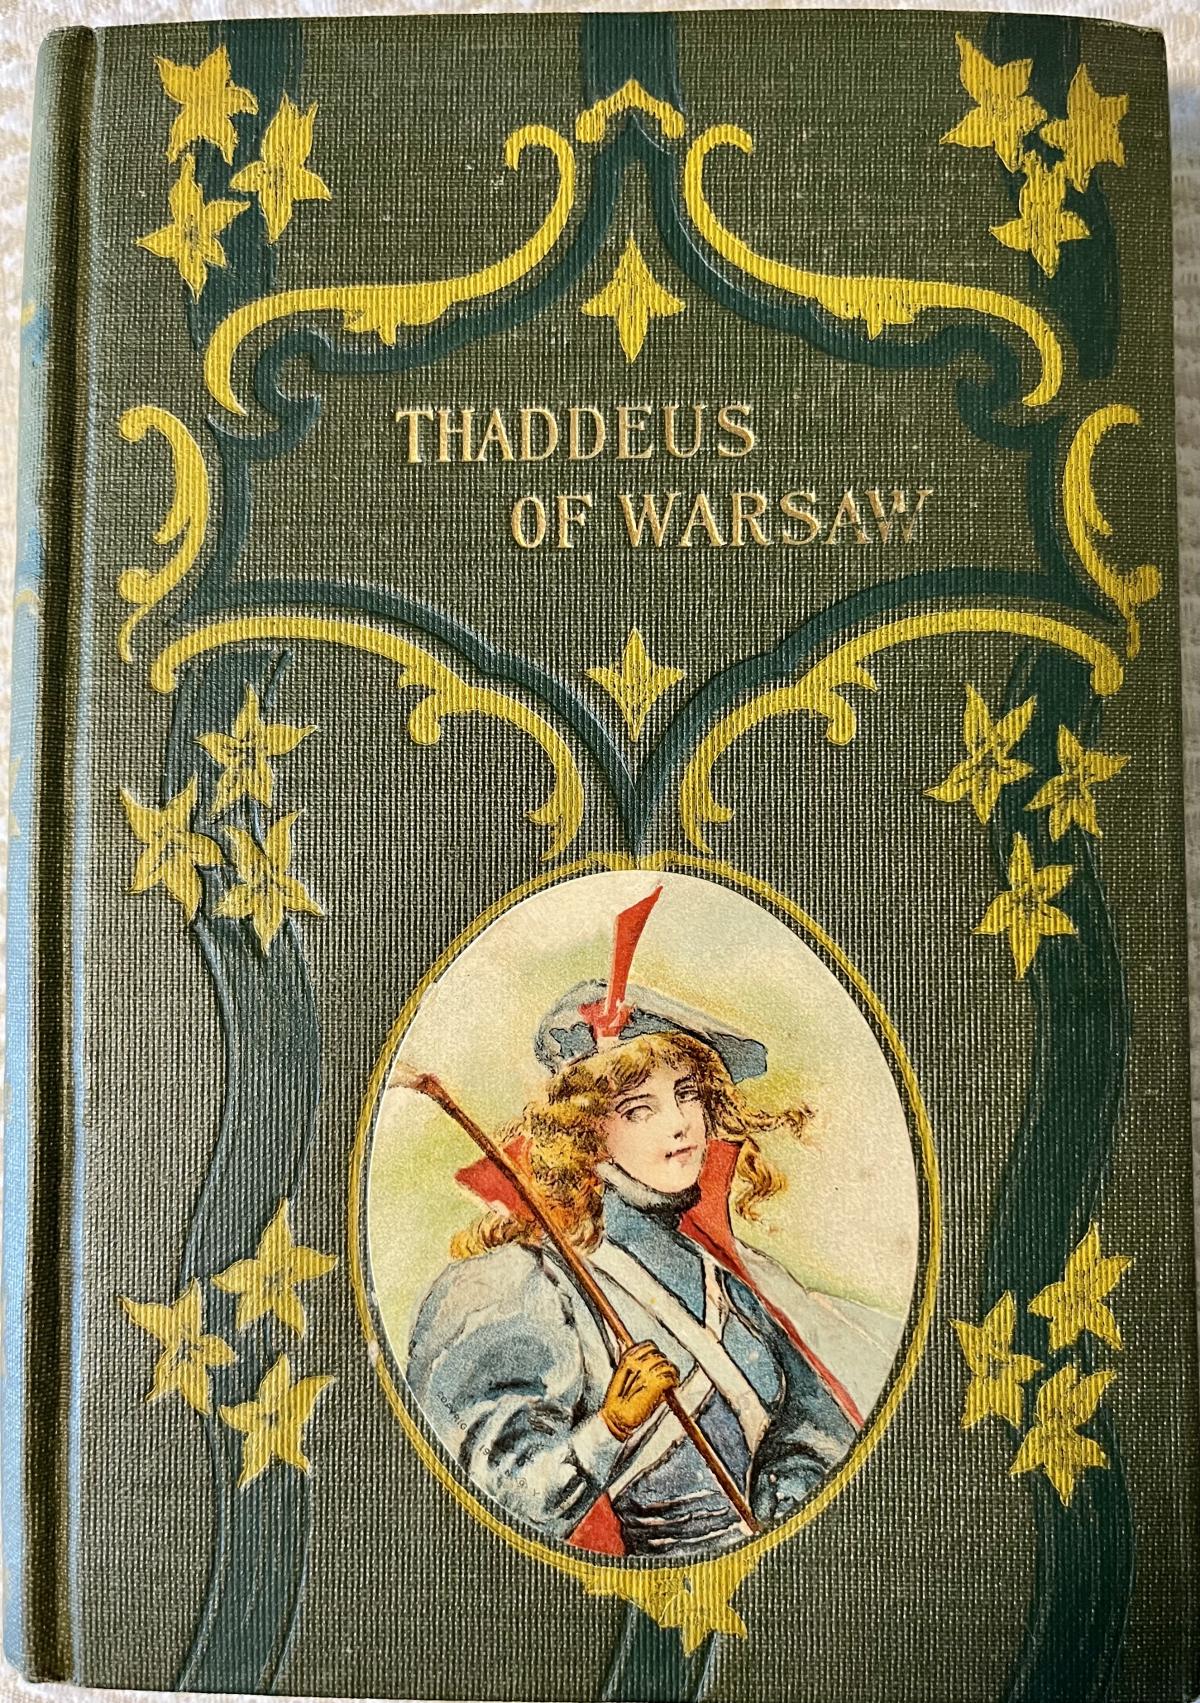 green book cover with inset of Polish soldier